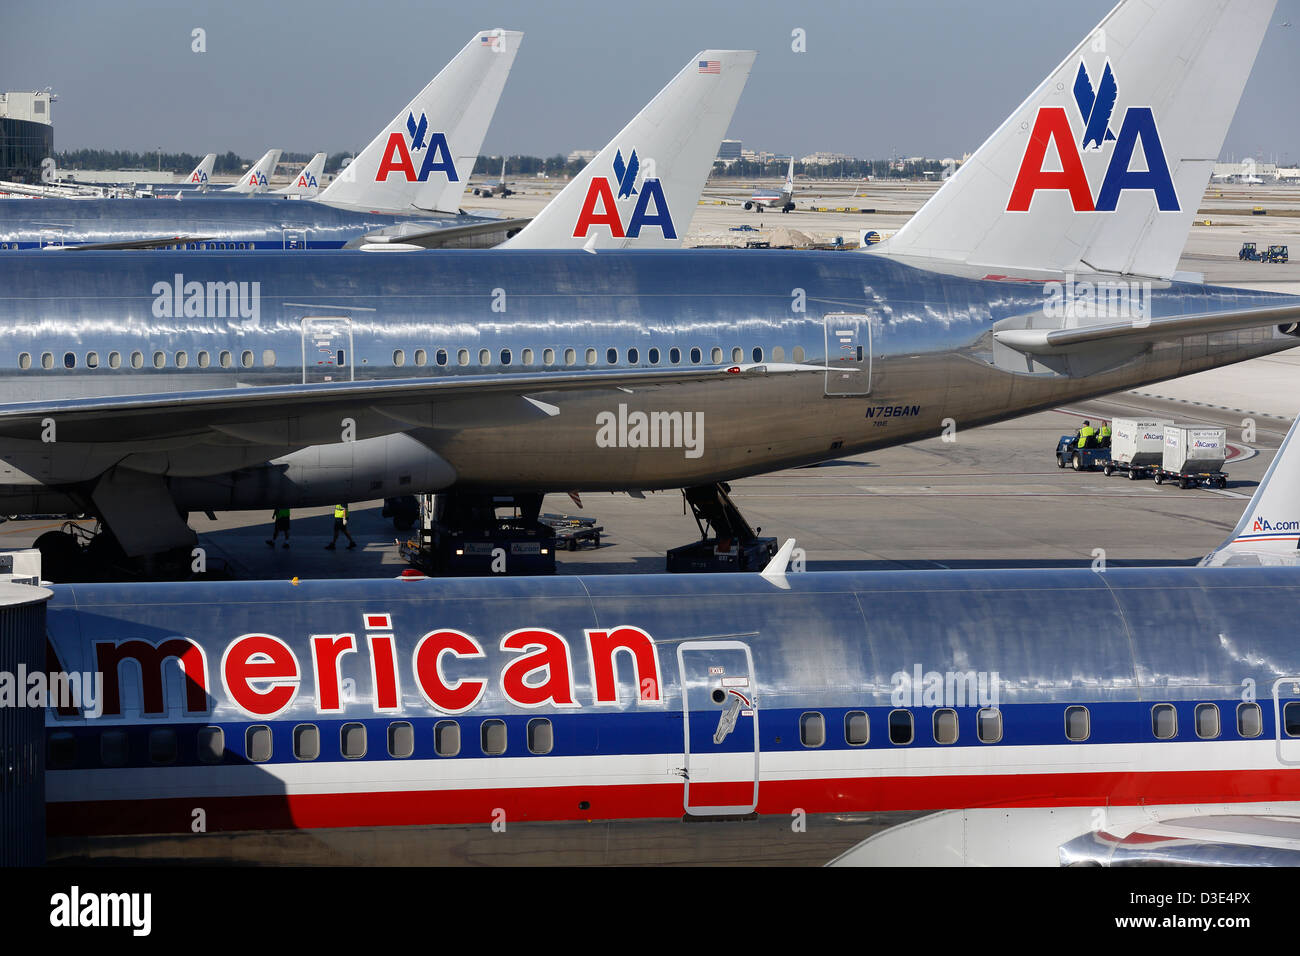 american airlines planes, miami international airport